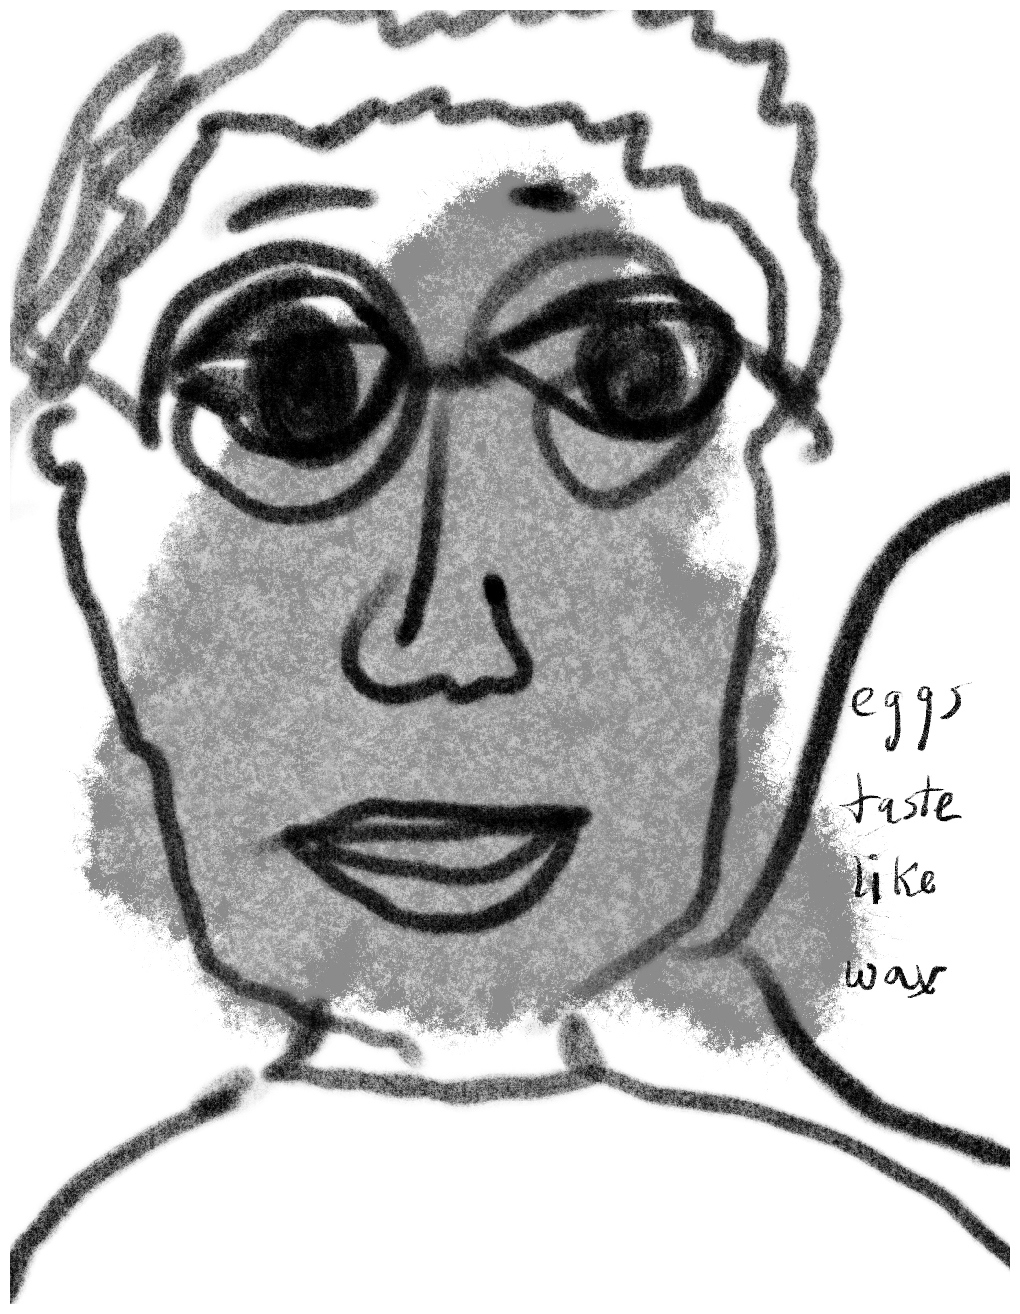 Panel three of a four-panel comic called 'A shared experience', consisting of thick black line drawing and hand written text against a grey and white background. The head and shoulders of a young man with large eyes behind a pair of round glasses and short wavy hair fills most of the panel. The figure has a slight smile and looks directly out at the viewer. A speech bubble from him says "eggs taste like wax".